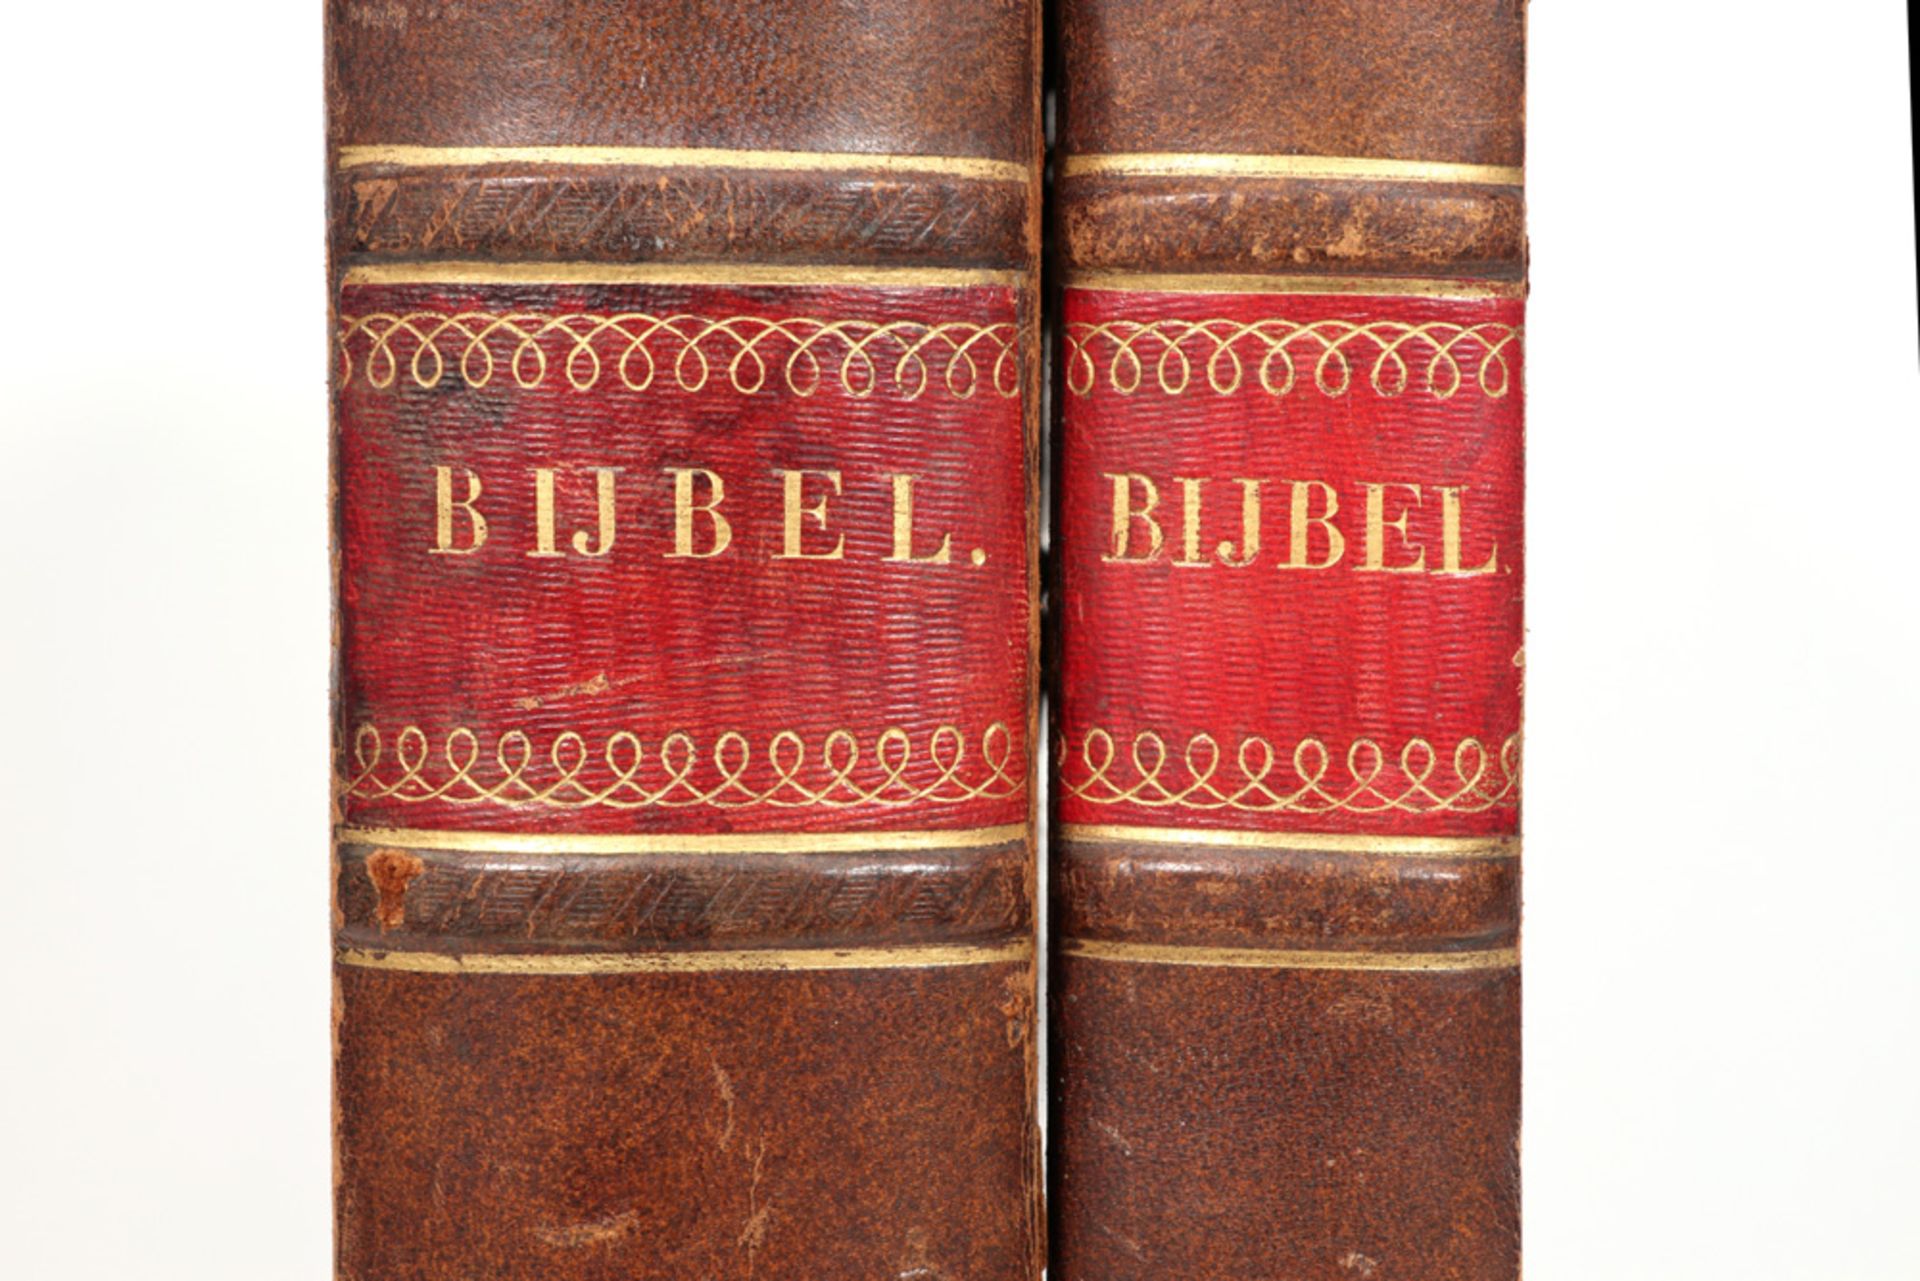 two-part Dutch print bible - the so-called "Mortier" bible - published in 1700 by Pieter Mortier in  - Image 2 of 6